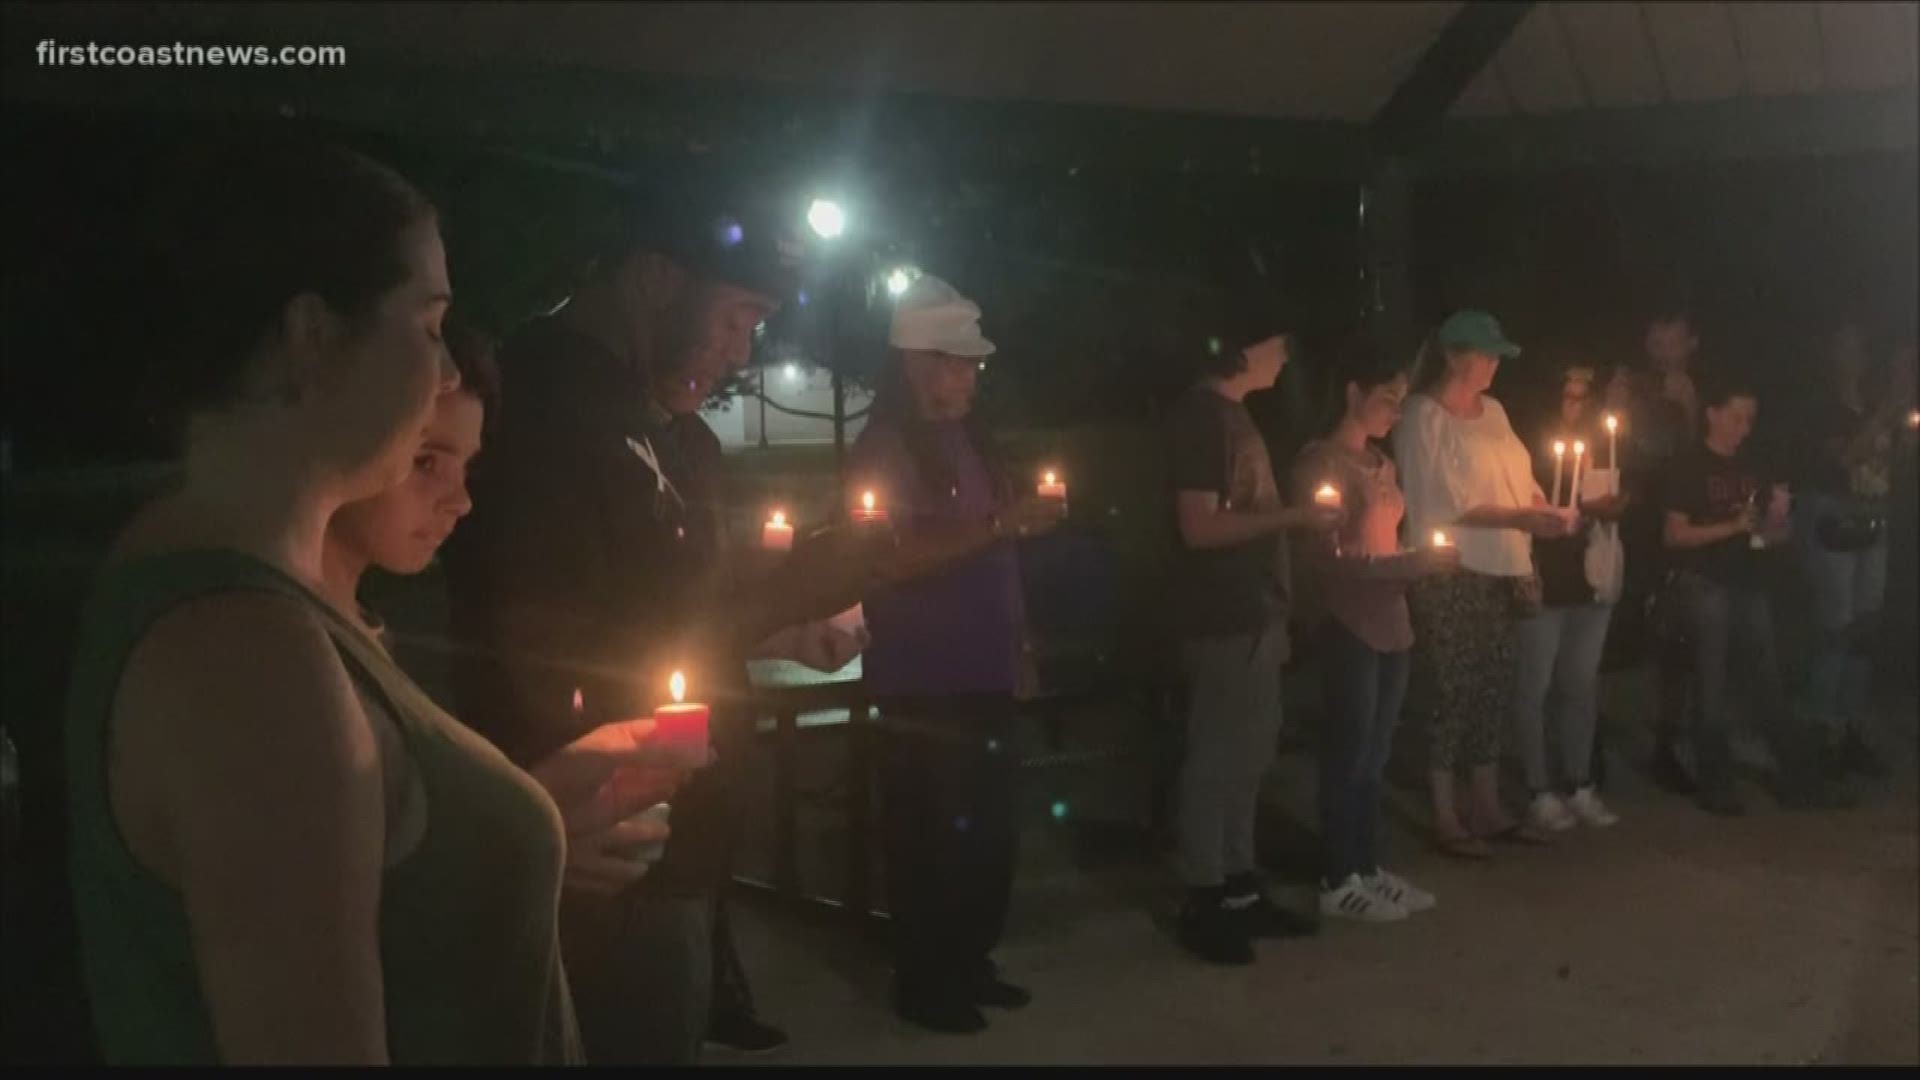 A candlelight vigil was held Saturday evening in honor of missing 5-year-old Jacksonville girl Taylor Williams.